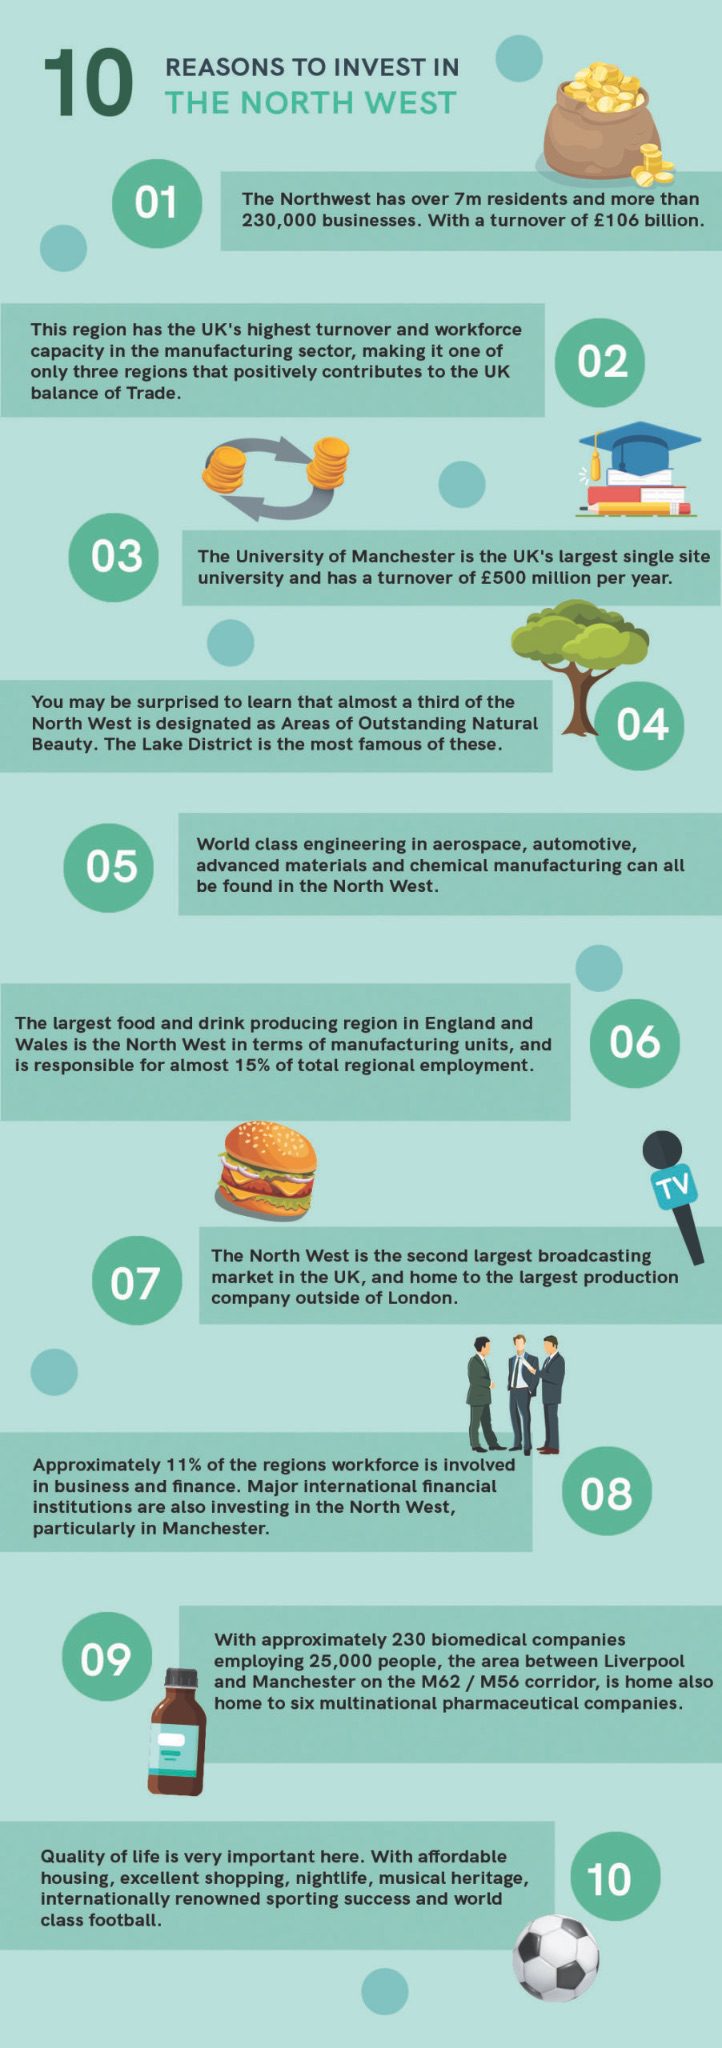 10 Reasons to Invest in the North West infographic